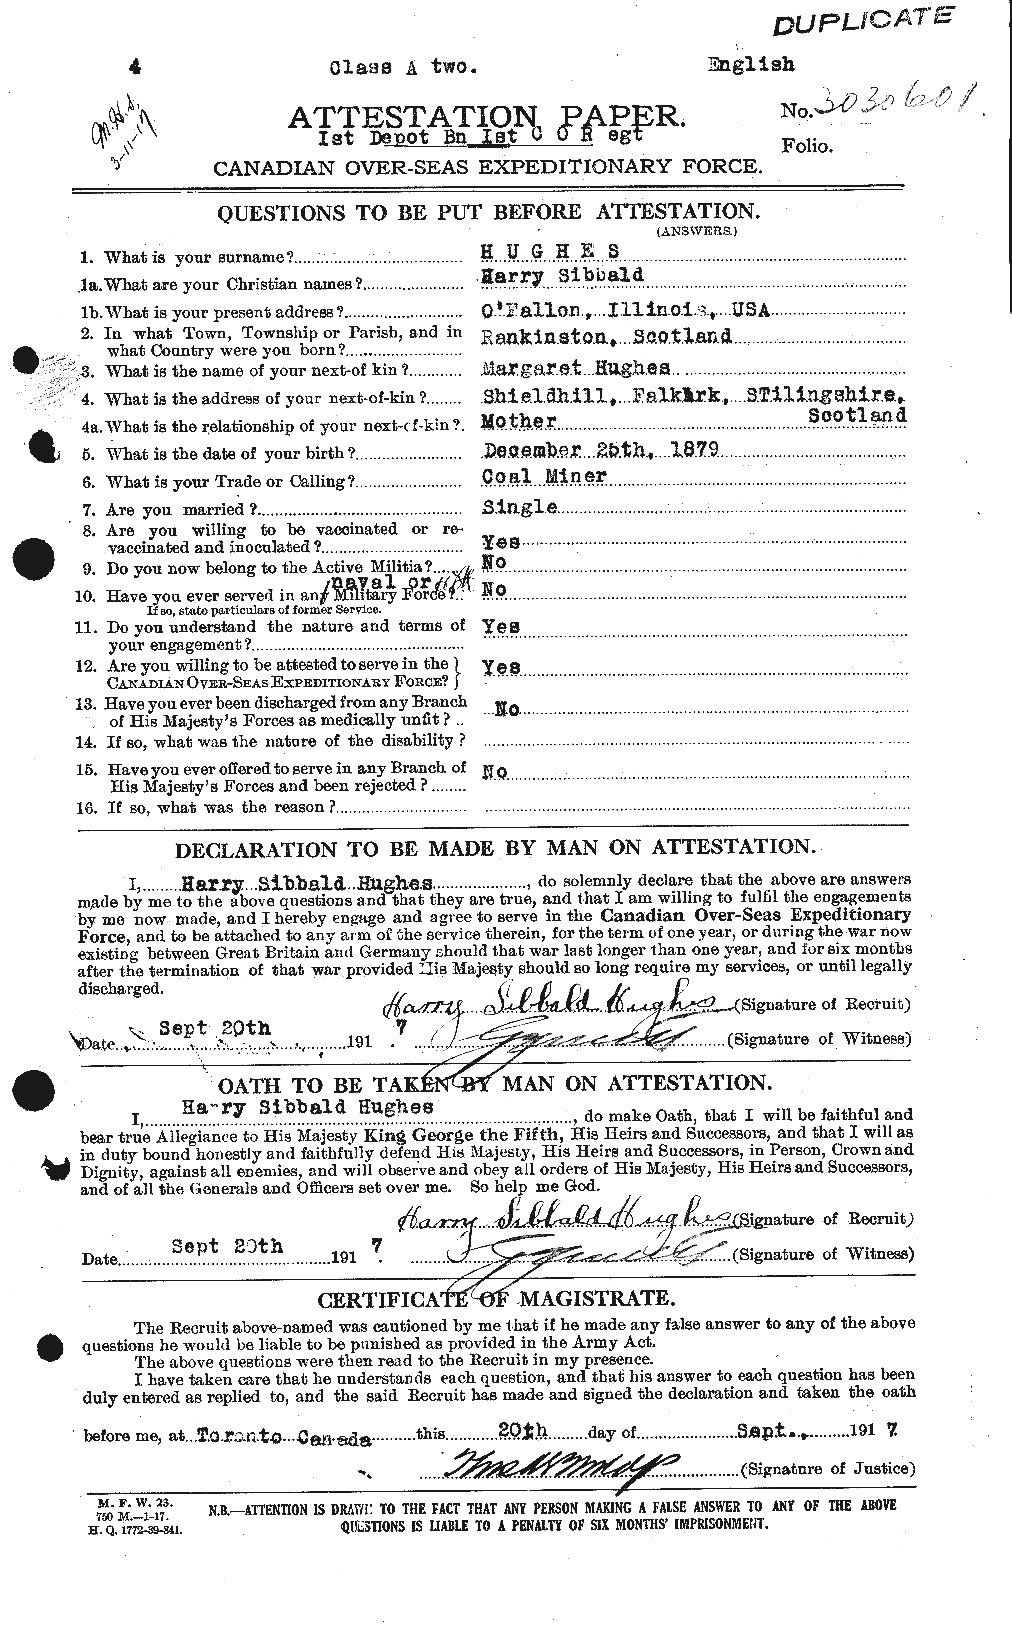 Personnel Records of the First World War - CEF 403876a